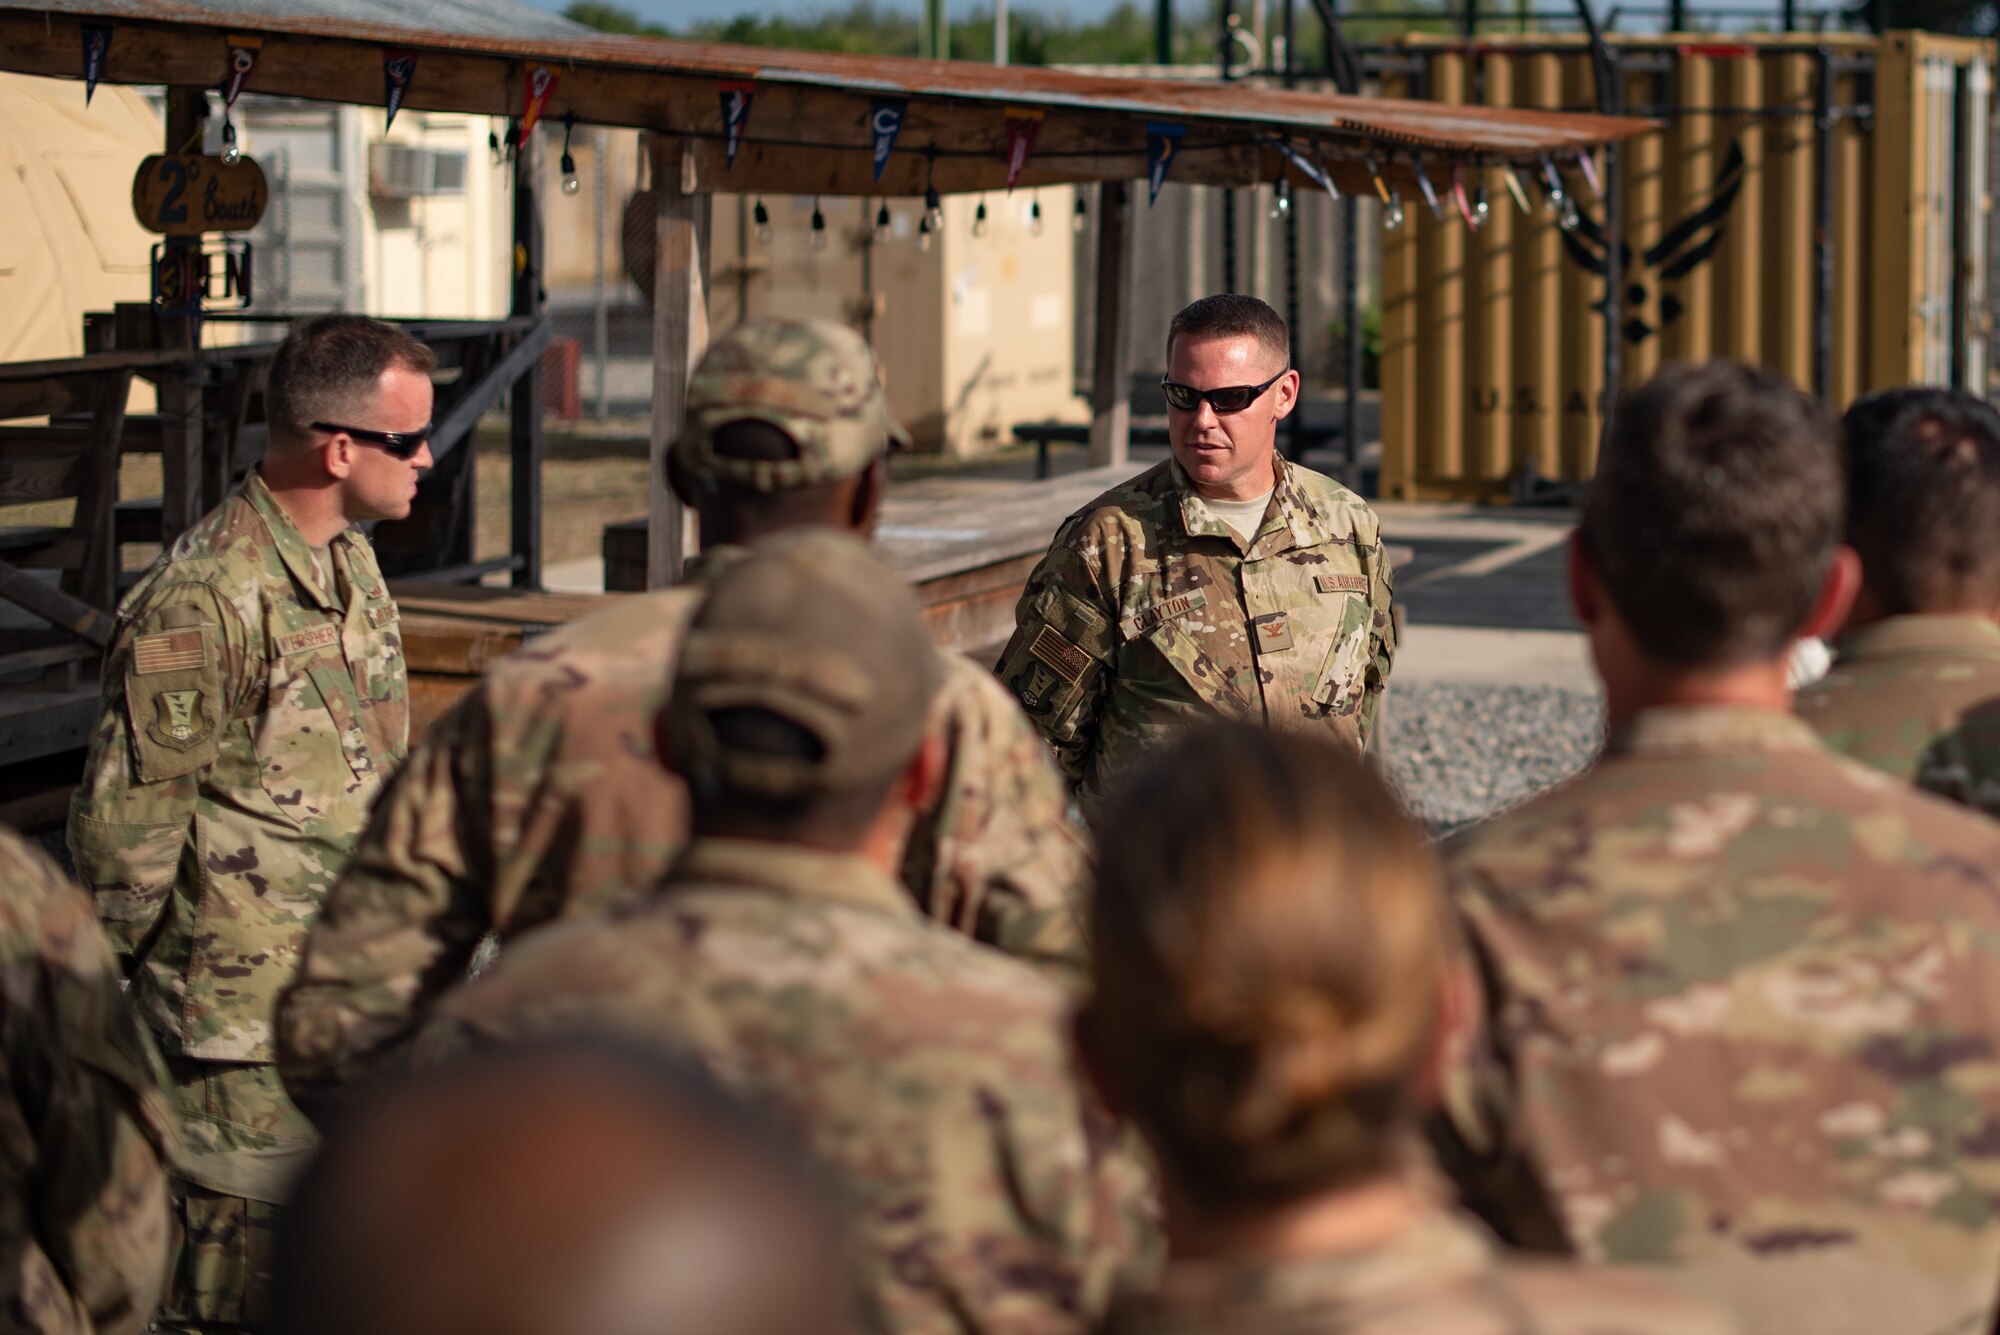 U.S. Air Force Col. Daniel C. Clayton, 435th Air Expeditionary Wing and 435th Air Ground Operations Wing commander, speaks with Airmen assigned to the 475th Expeditionary Air Base Squadron at Camp Simba, Kenya, Aug. 30, 2019. Clayton asked the Airmen what they needed to execute the mission more effectively and opened up the meeting for any questions they had. Clayton, and Chief Master Sgt. Jeremy Unterseher, 435th AEW and 435th AGOW command chief, visited each location in the area of responsibility as part of an immersion tour. (U.S. Air Force photo by Staff Sgt. Devin Boyer)